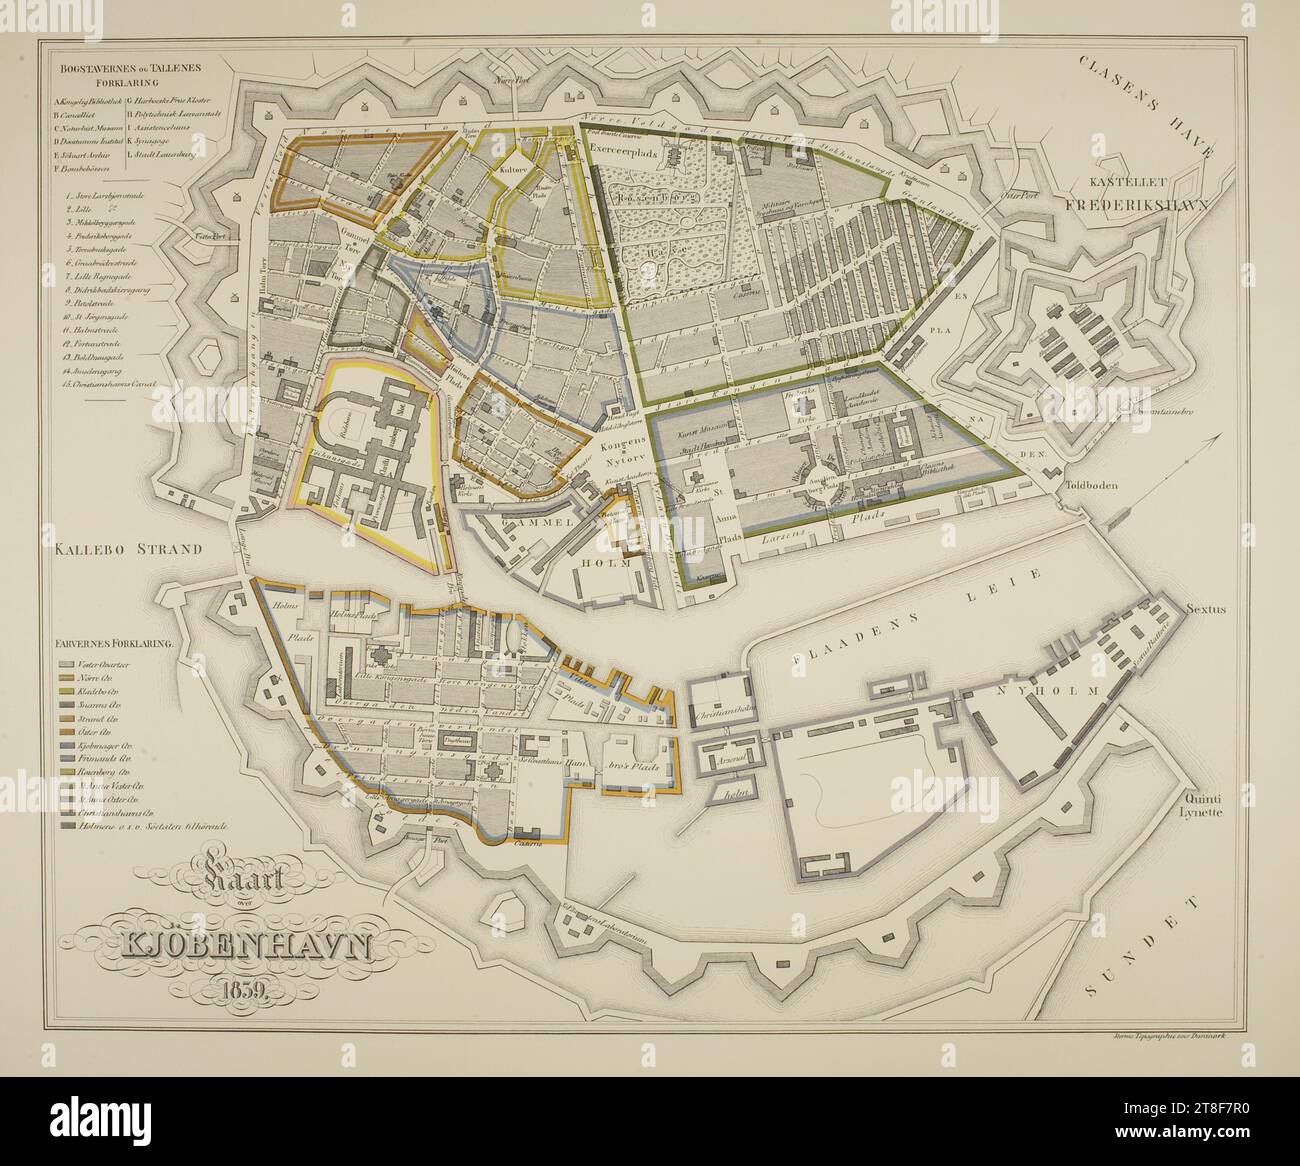 Map of Copenhagen 1839, 1874, Graphic Art, Lithograph, It was a small town of some 120,000 inhabitants to which Thorvaldsen returned in 1838. In addition to the Sound to the east, the city was defined by the ramparts, the jagged structures on the map, that defined its extent. The Town Hall Square is today at the absolute centre of the city. In 1838, on the other hand, it was outside the ramparts., Paper, Color, Printer's ink, Lithography, Printet, Height (paper size) 500 mm, Width (paper size) 620 mm, Trykt ved Geodætisk Institut 1874, Storms Topographie over Danmark, Graphic Design Stock Photo